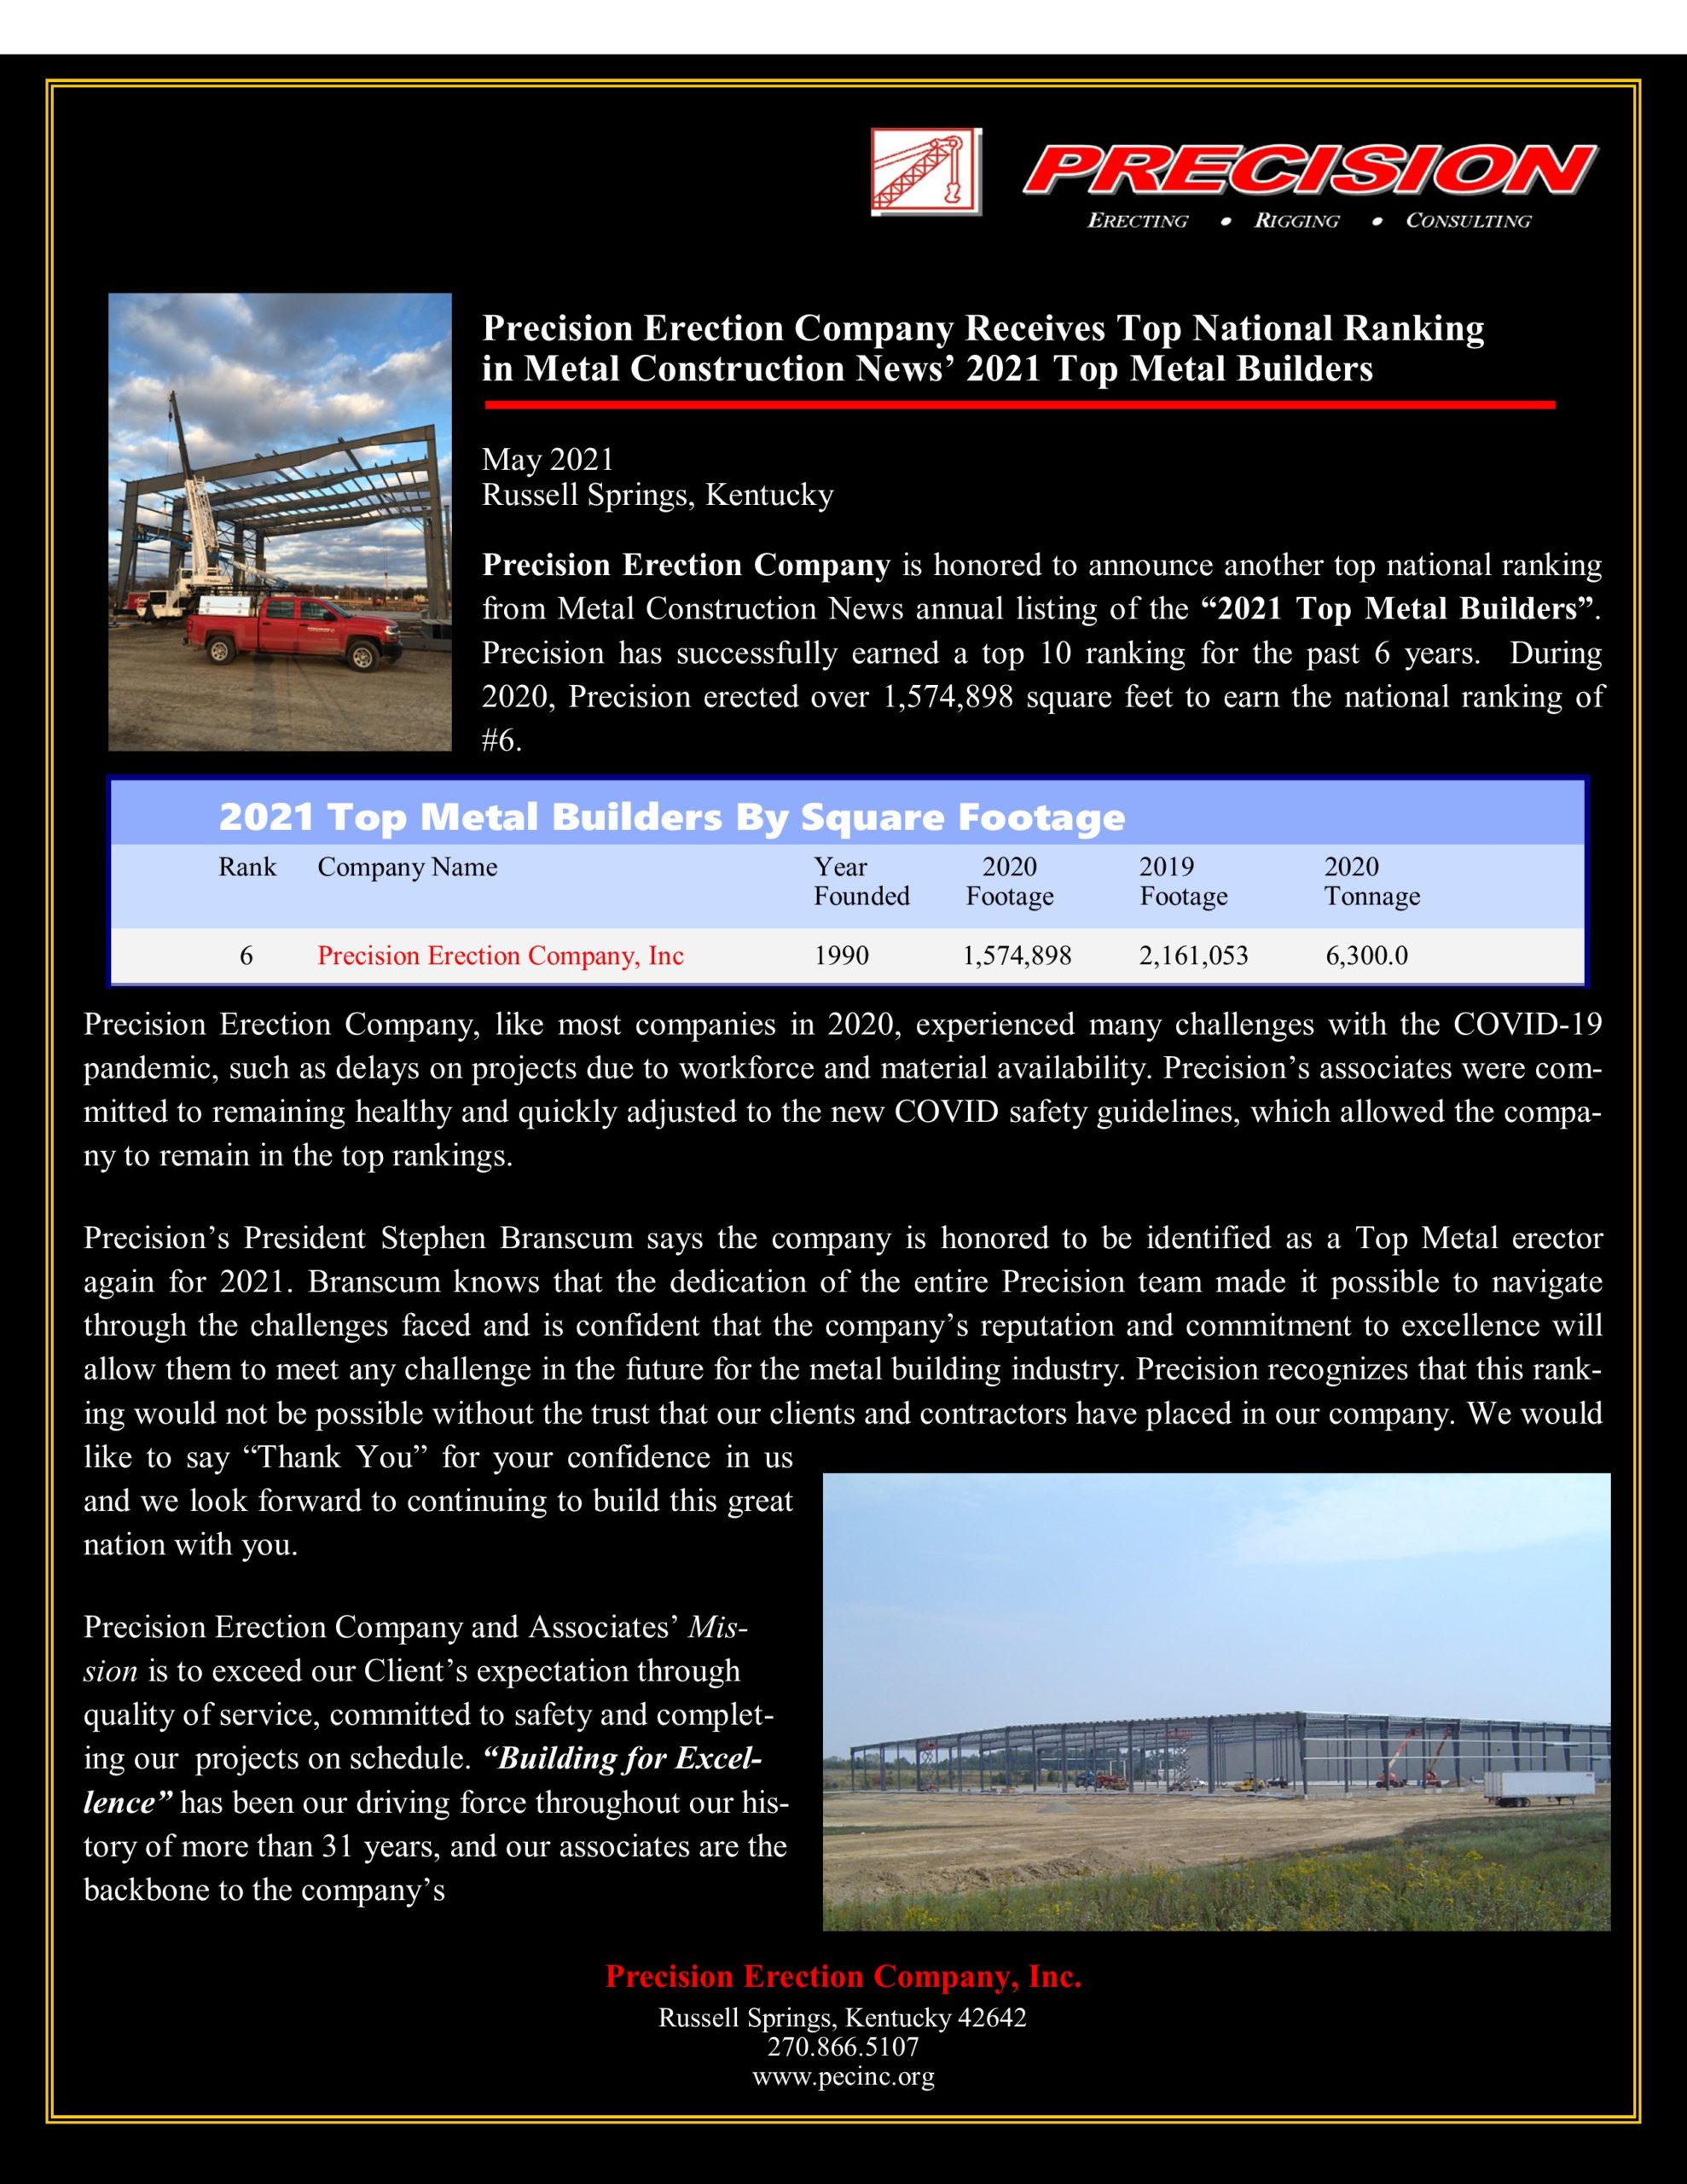 Precision Erection Company Receives Top National Ranking  In Metal Construction News’ 2021 Top Metal Builders